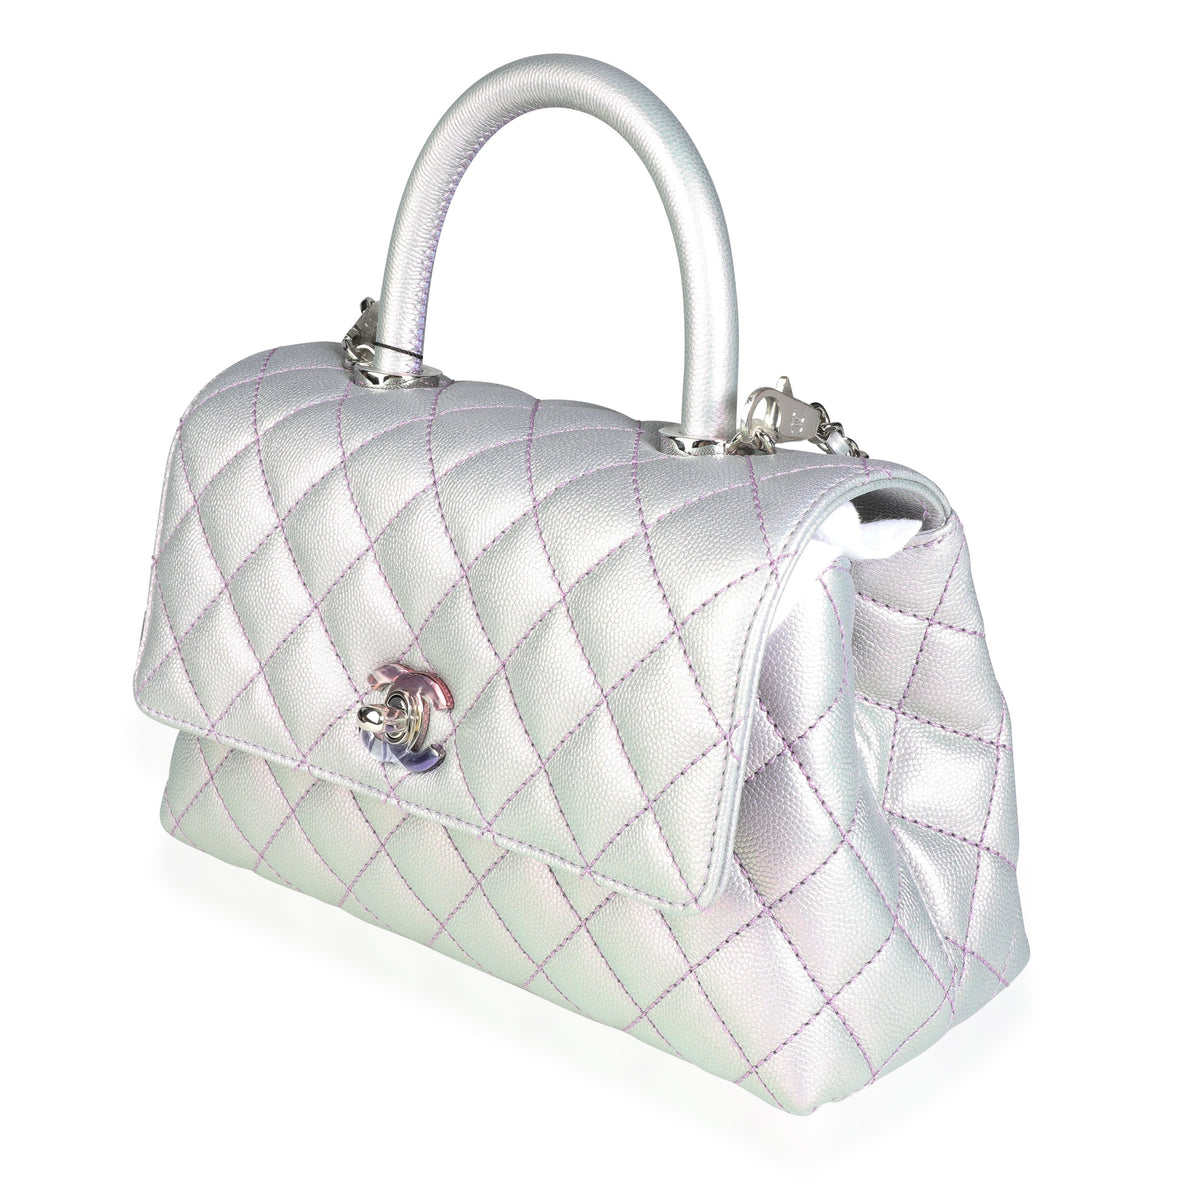 Chanel Light Purple Iridescent Quilted Caviar Small Coco Top Handle Bag, myGemma